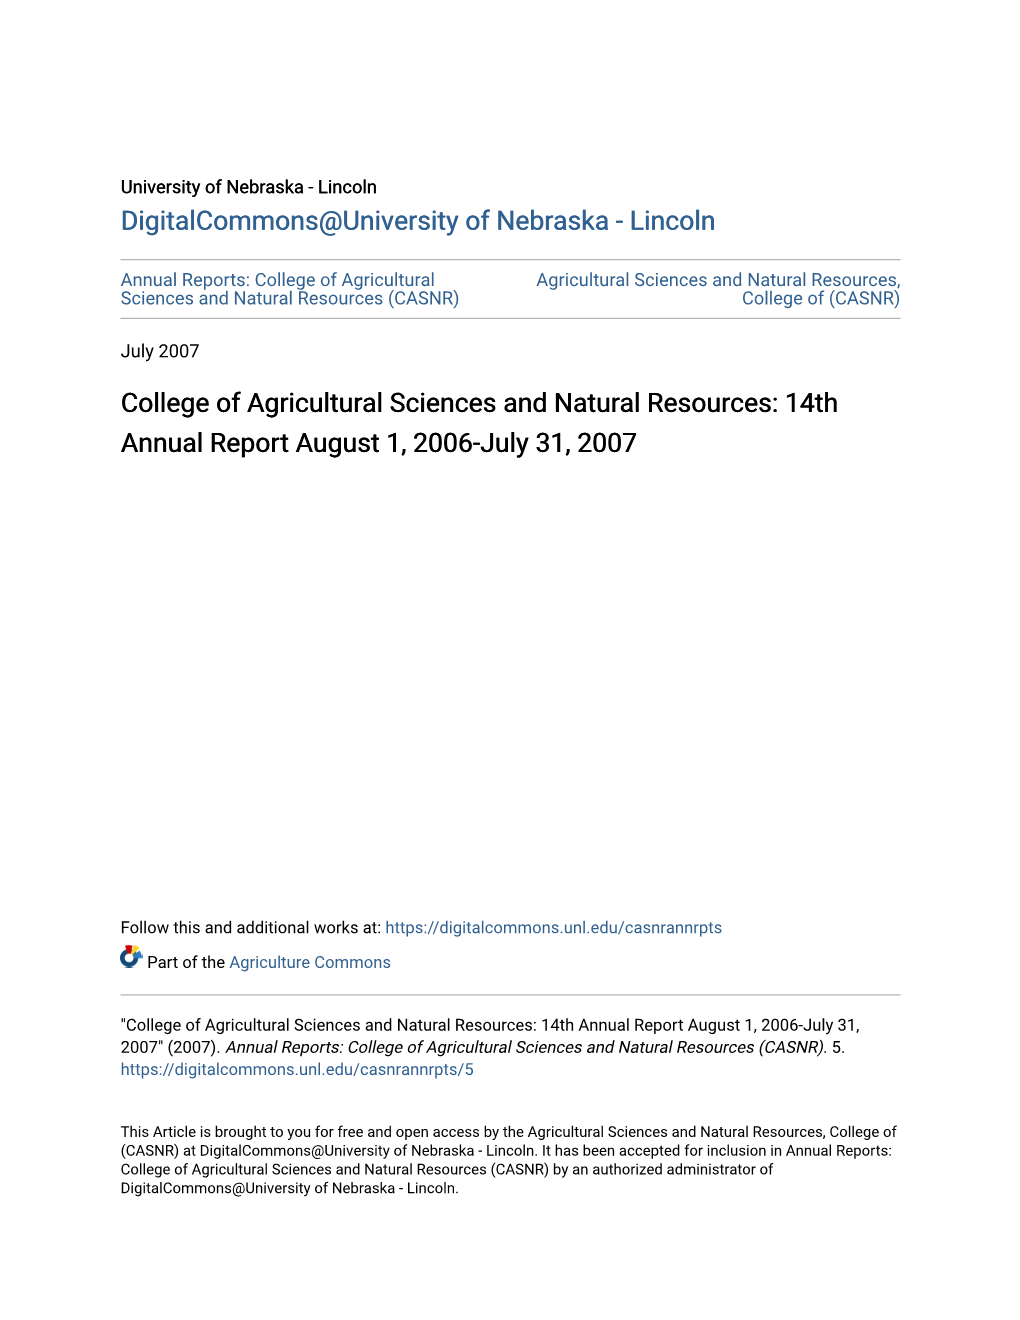 College of Agricultural Sciences and Natural Resources: 14Th Annual Report August 1, 2006-July 31, 2007